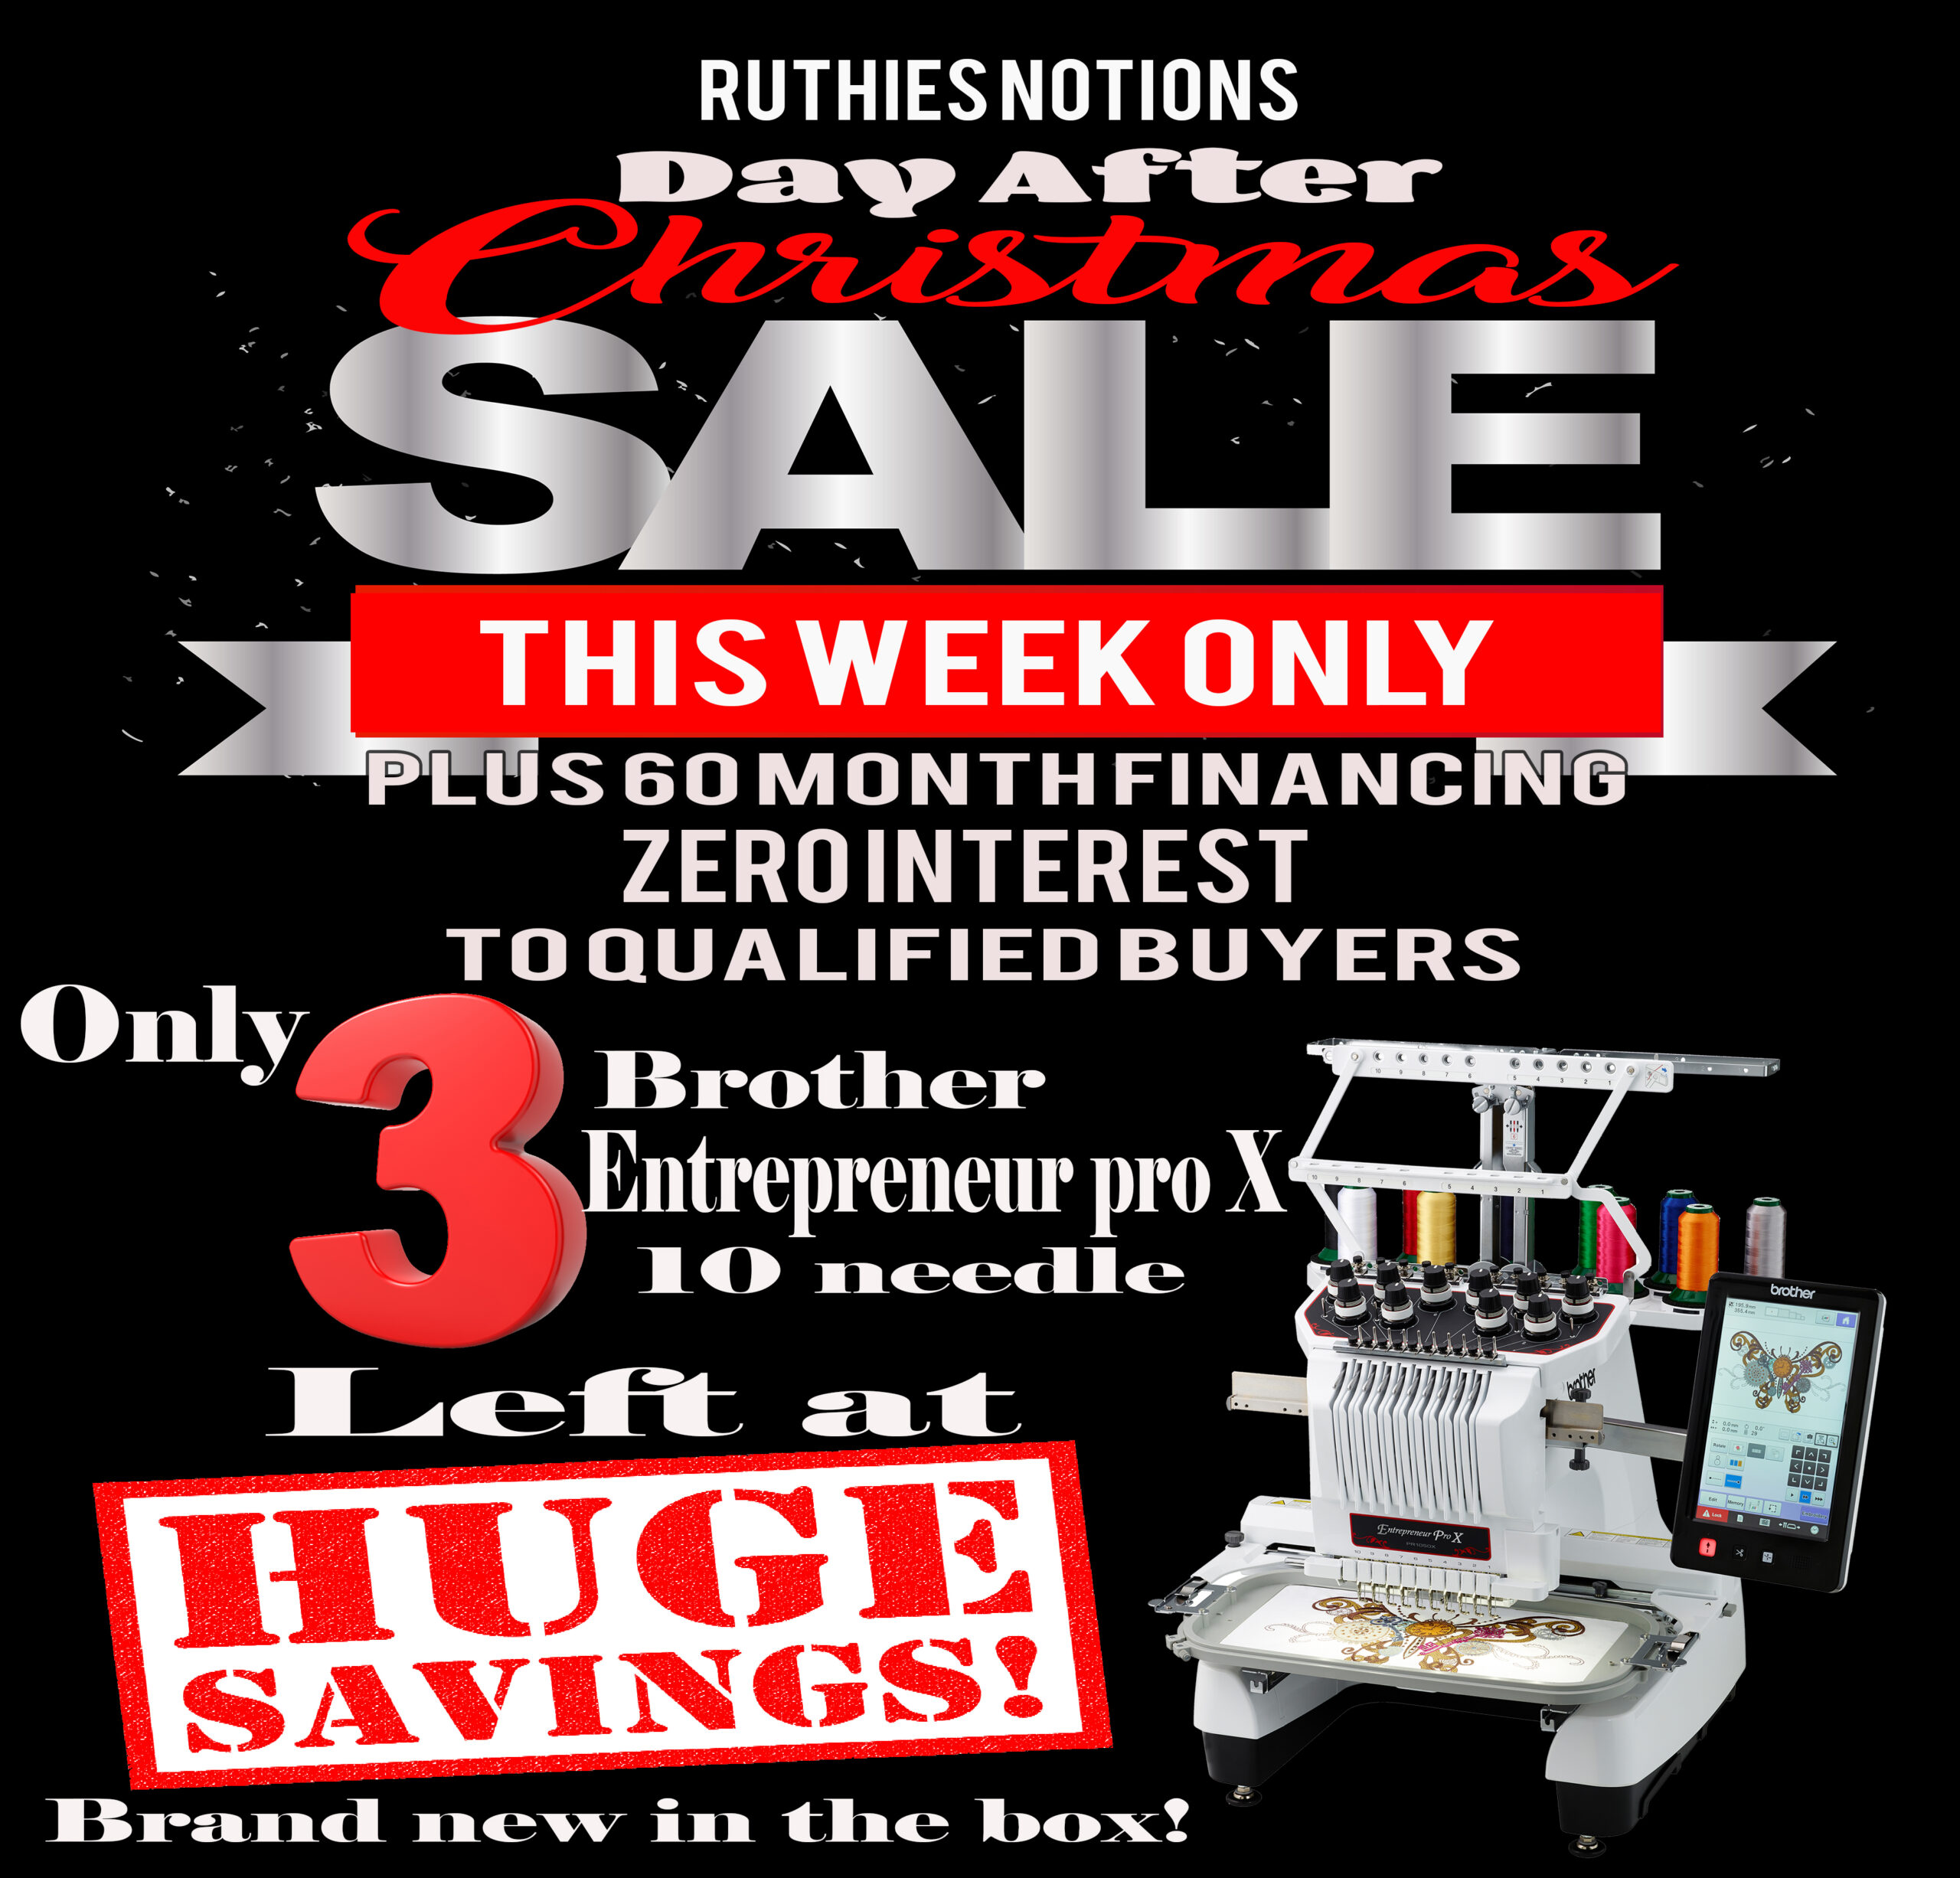 Ruthies Entrepreneur day after christmas sale ad